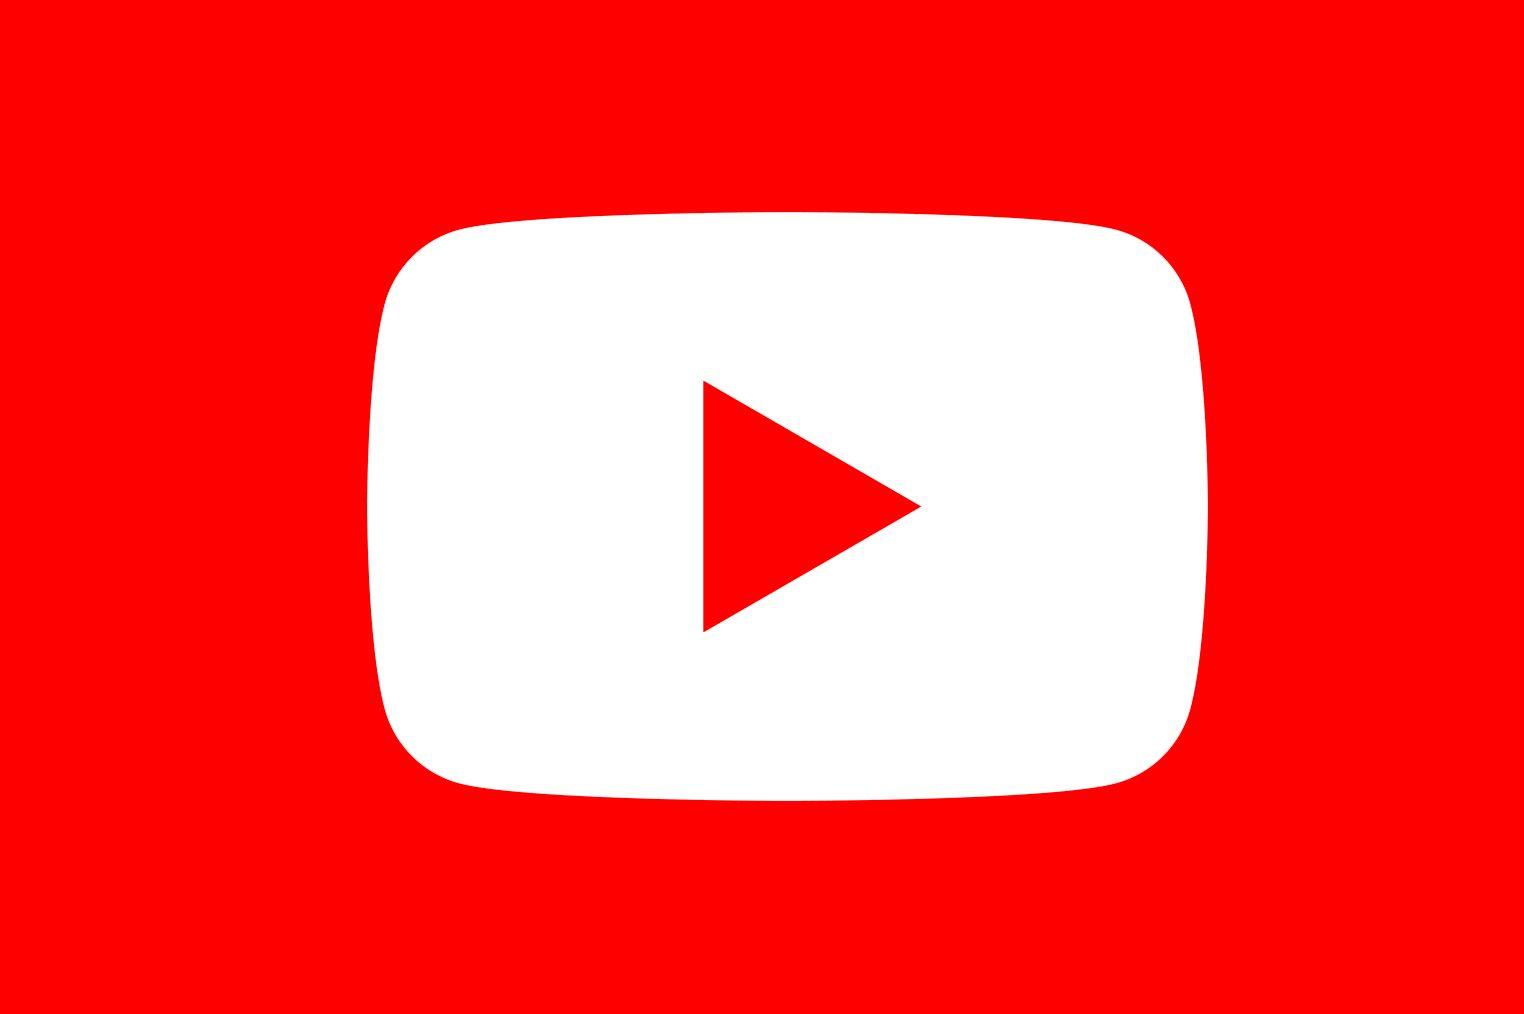 Red with White Triangles Logo - YouTube Logo, YouTube Symbol, Meaning, History and Evolution